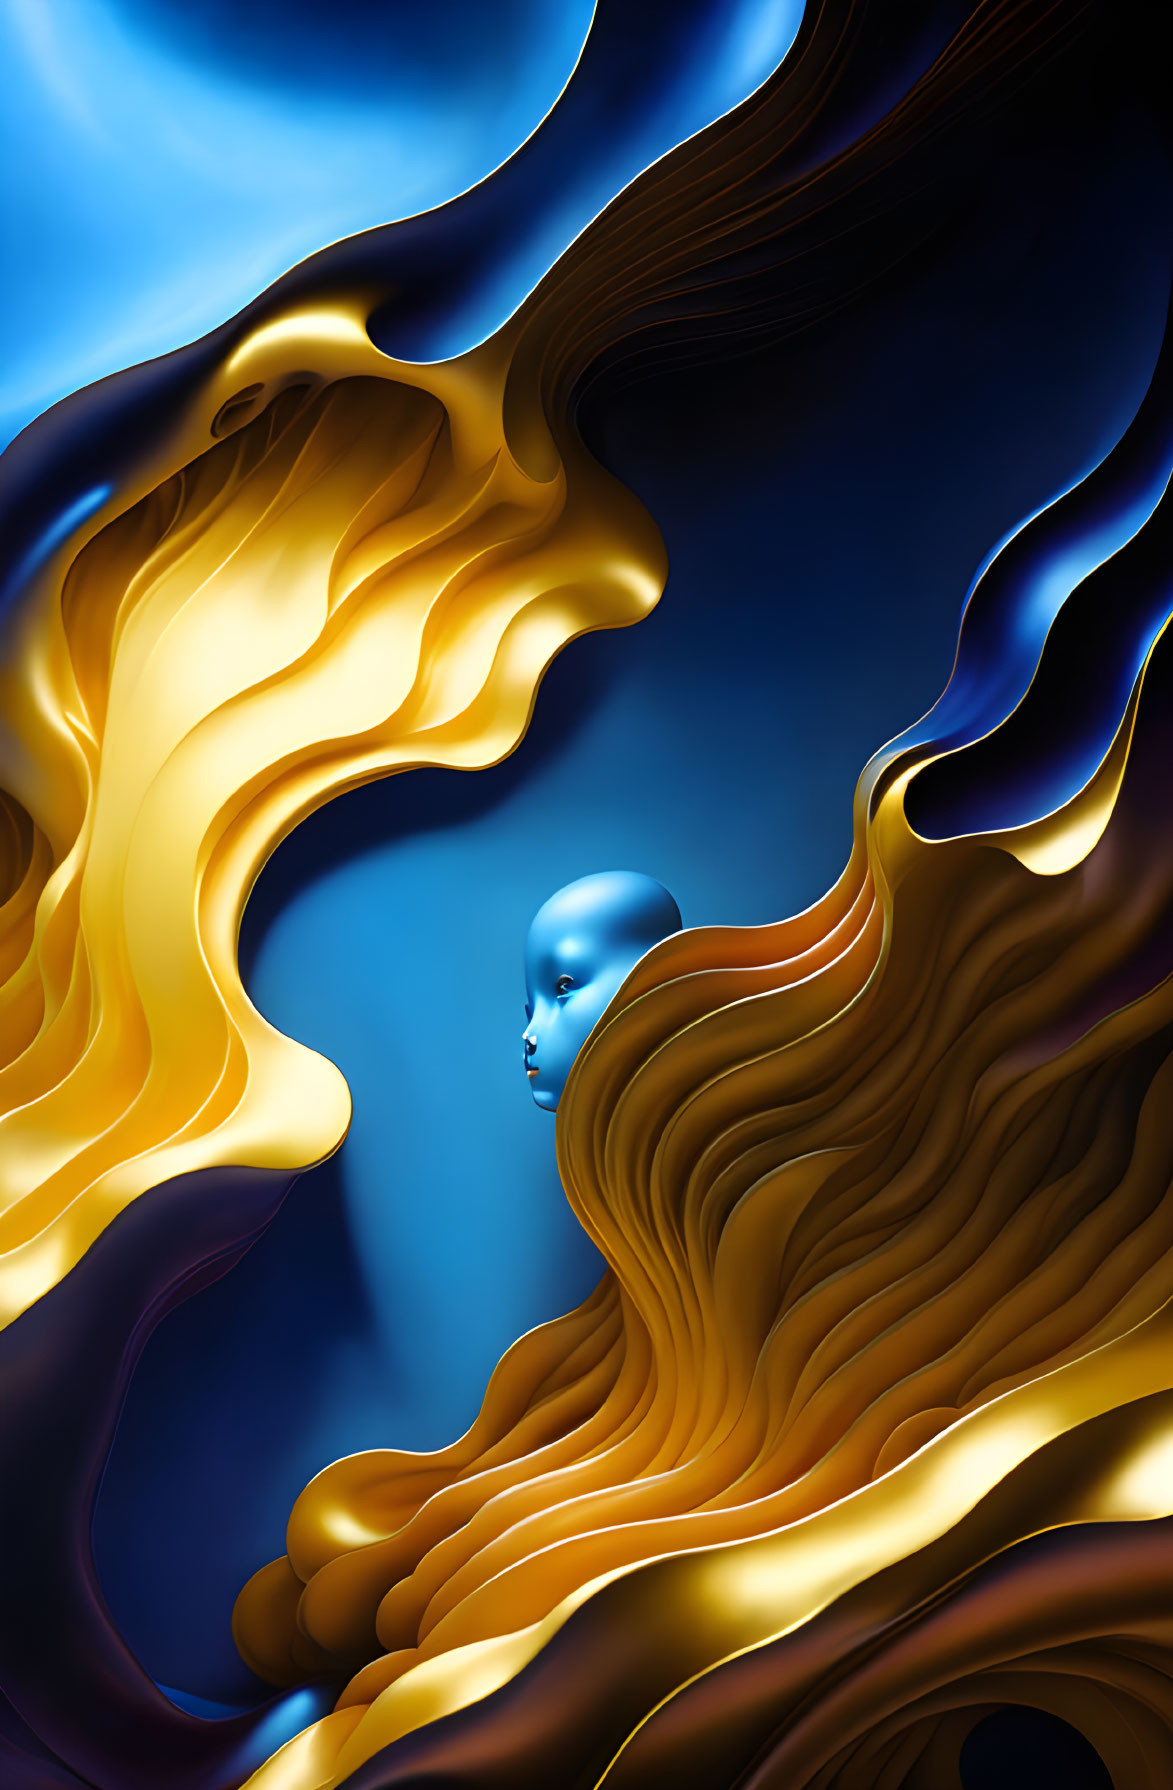 Surreal blue face in gold and blue wavy shapes creating motion.